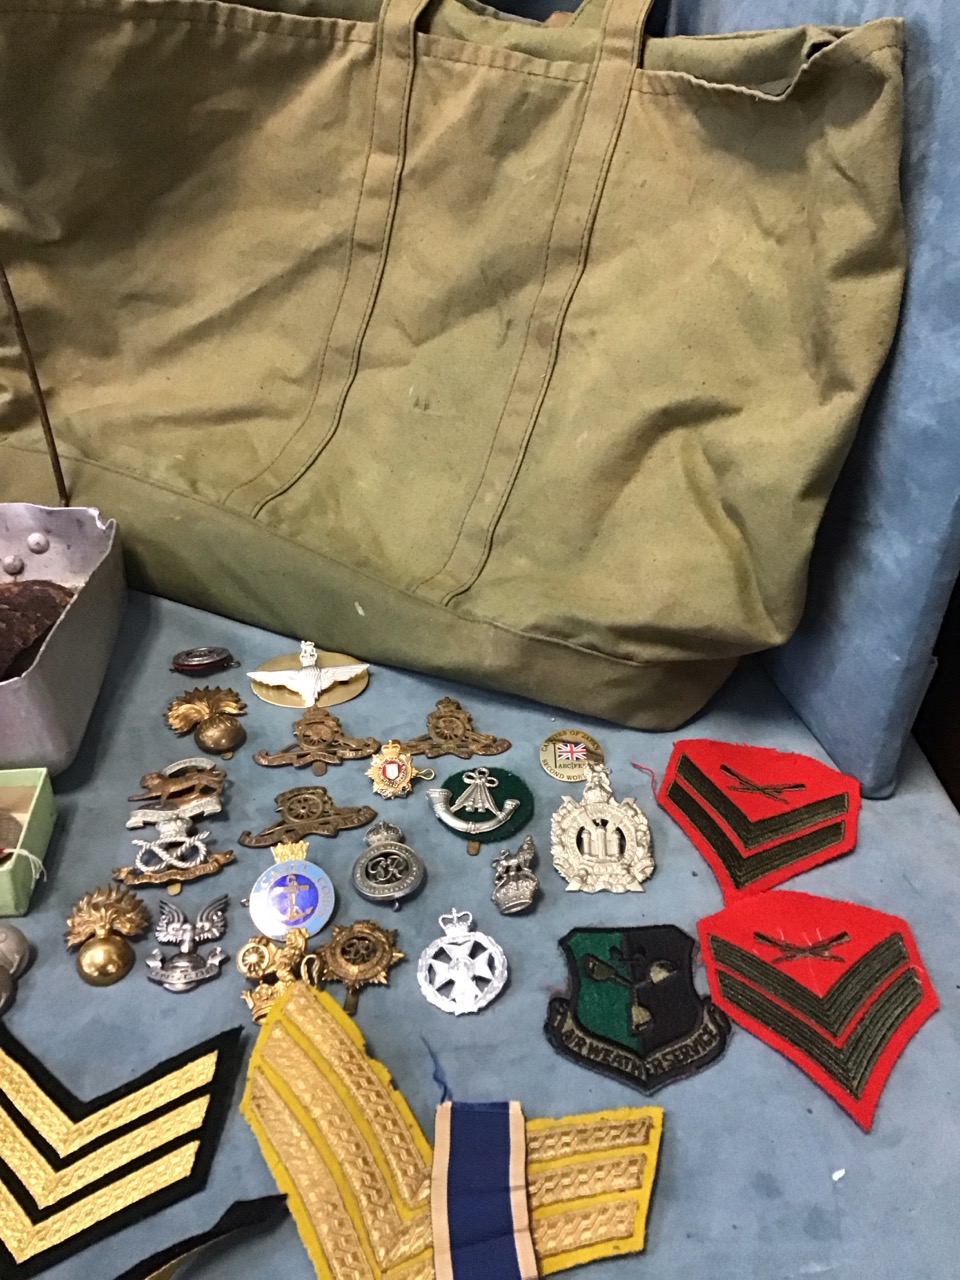 Miscellaneous militaria including cloth badges & insignia, uniform buttons, a shell fragment, WWII - Image 3 of 3